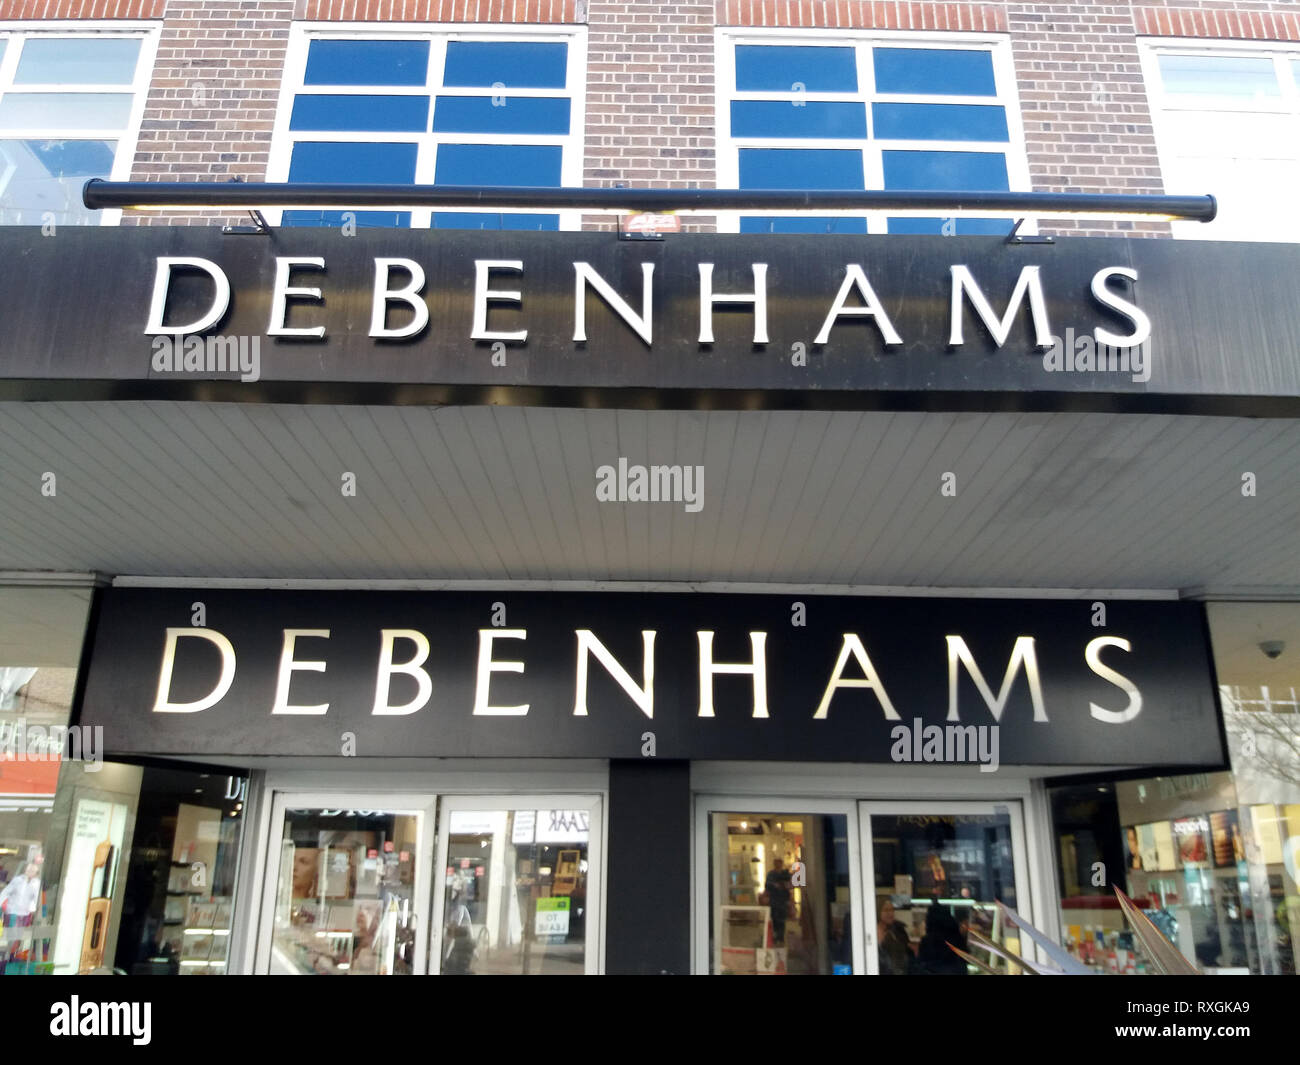 Sports Direct and House of Fraser boss, Mike Ashley's attempt to take control of ailing UK Department store chain Debenhams may come under the scrutiny of the competition watchdog the CWA, Shares in Debenhams rose nearly 16% on Friday to 3.53p, after Ashley attempted to call a Debenhams shareholder meeting to remove the department store's directors and install himself as chief executive. Debenhams is attempting to refinance £520m in debt facilities before the end of April. With uncertainty around the terms of the deal, Ashley is hoping to win over shareholders. The CWA have made no comment, bu Stock Photo